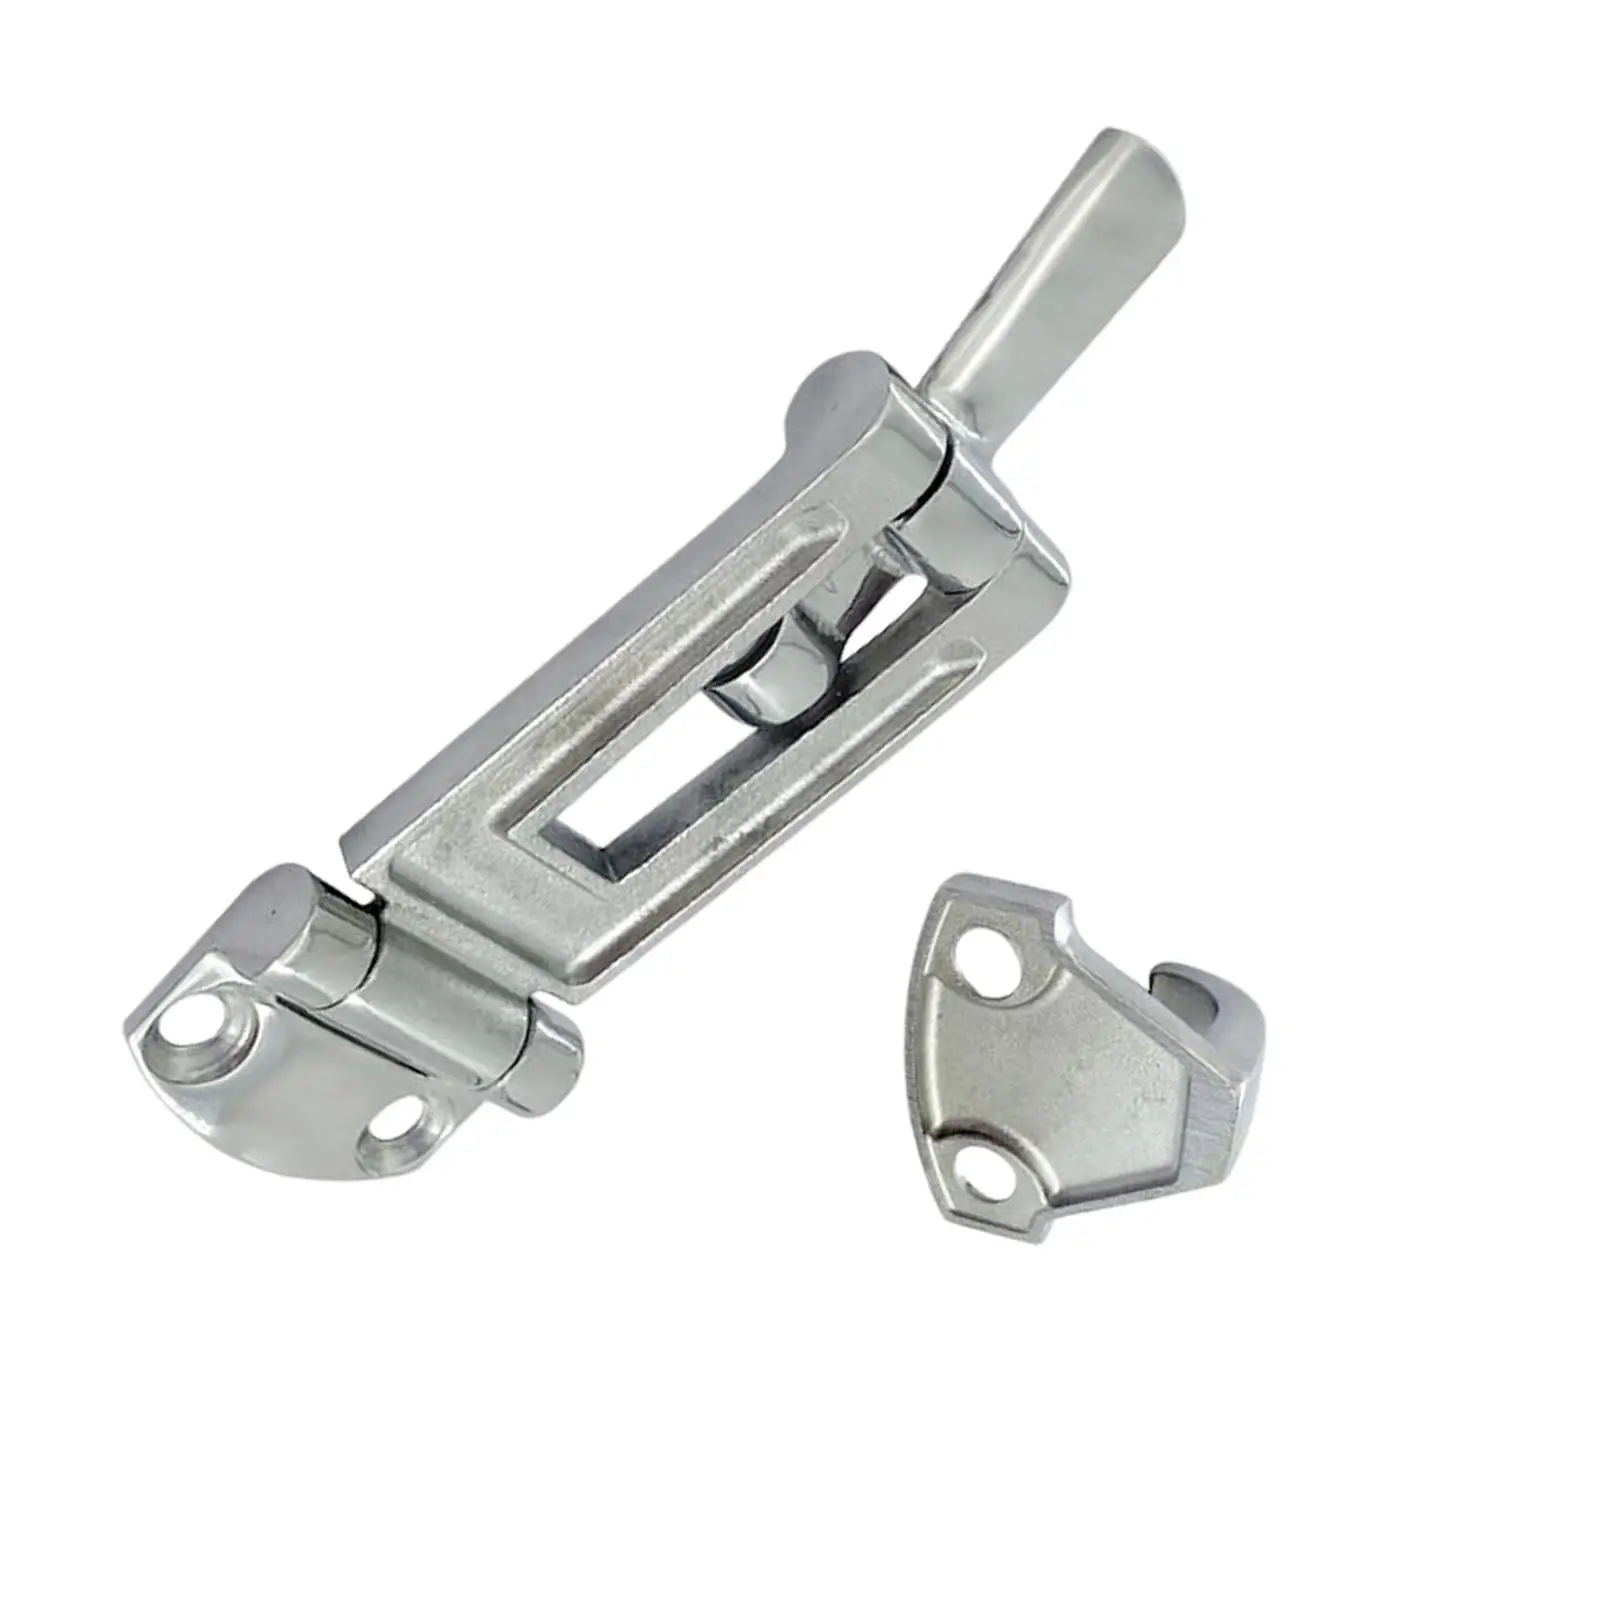 Locker Hatch Latch 316 Stainless Steel Anti Rattle Latch Fastener Clamp Bag Buckle Lockable Durable Professional Fit for Marine